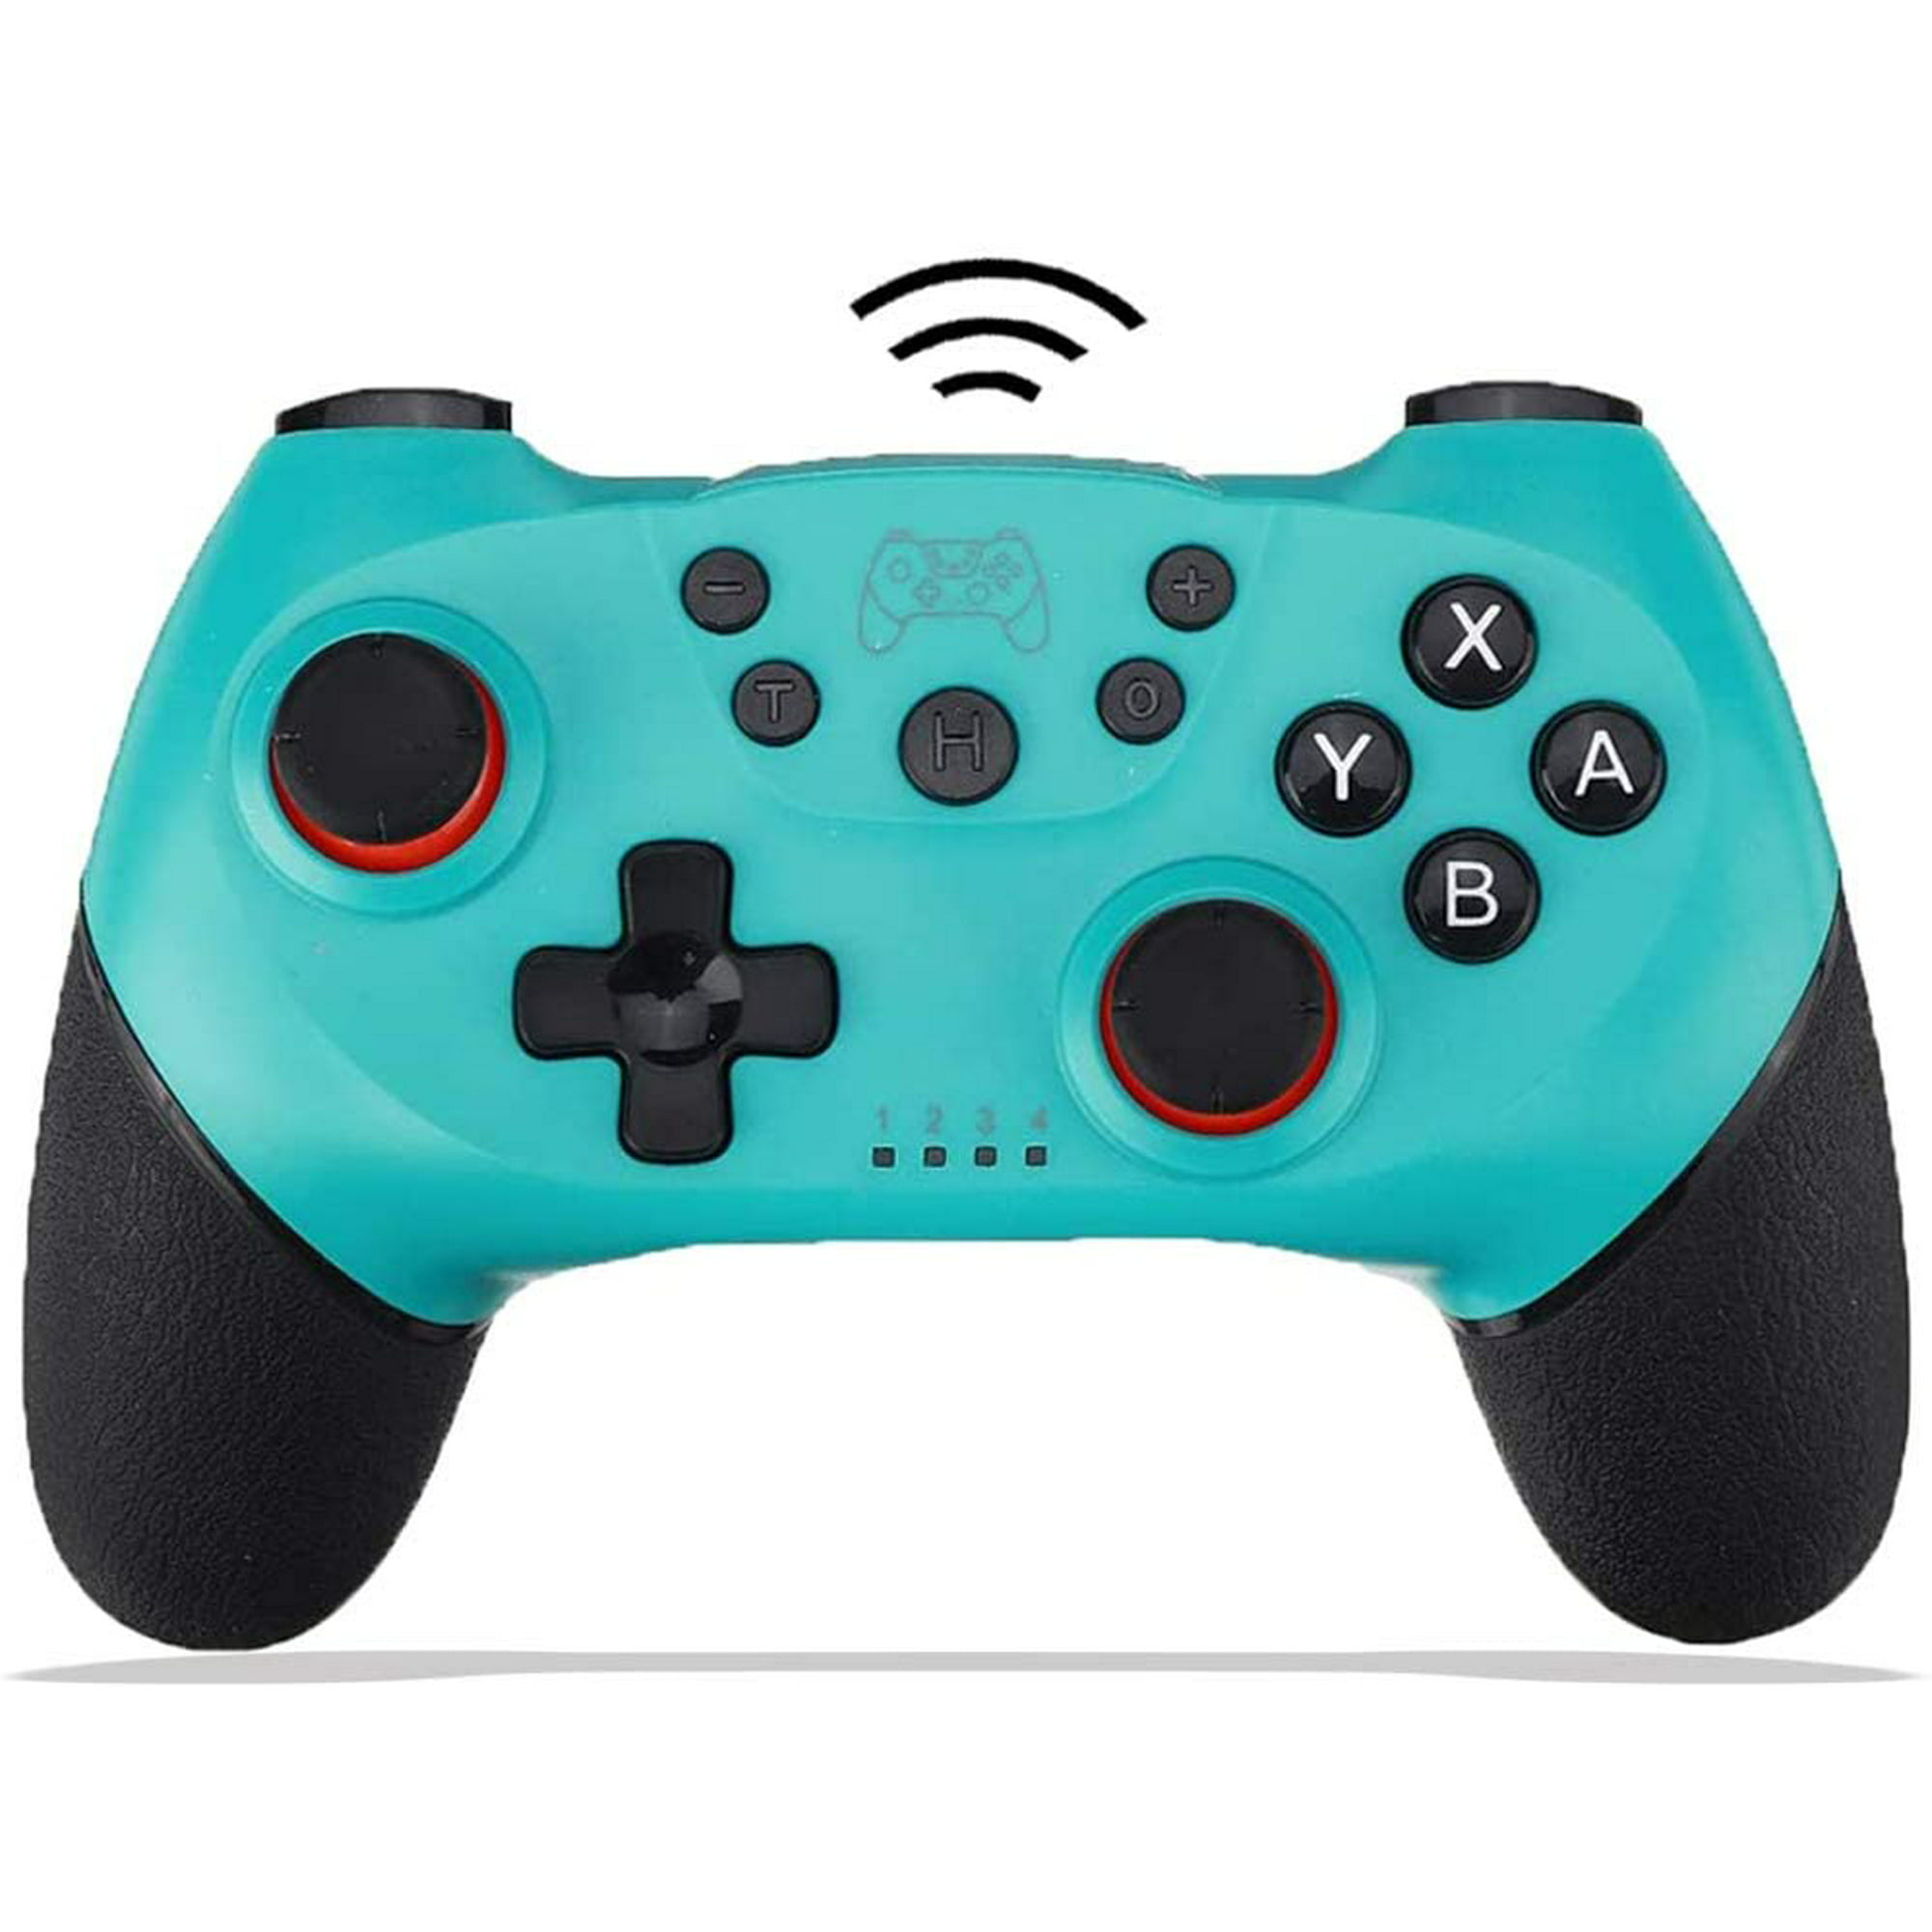 Wireless Switch Pro Controller For Nintendo Remote Bluetooth Gamepad Joystick For Nintendo Switch Console Pc Supports Walmart Canada